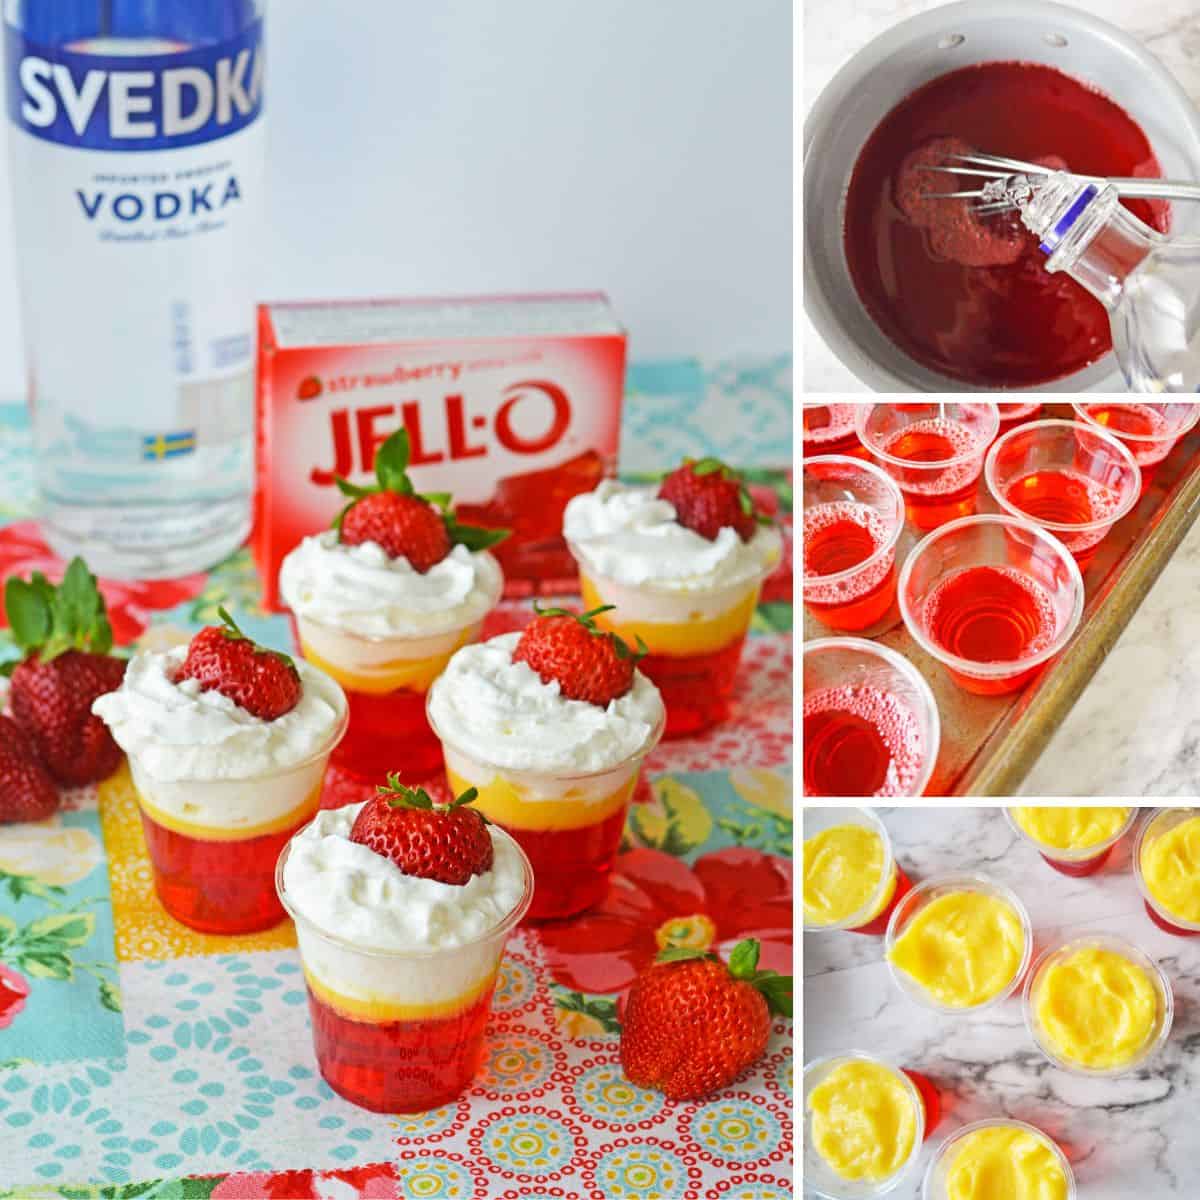 Collage of in-process photos showing vodka being poured into jello mixture, red jello in cups, vanilla pudding added to cups, and finished strawberry and cream jello shots topped with whipped cream and a fresh strawberry.